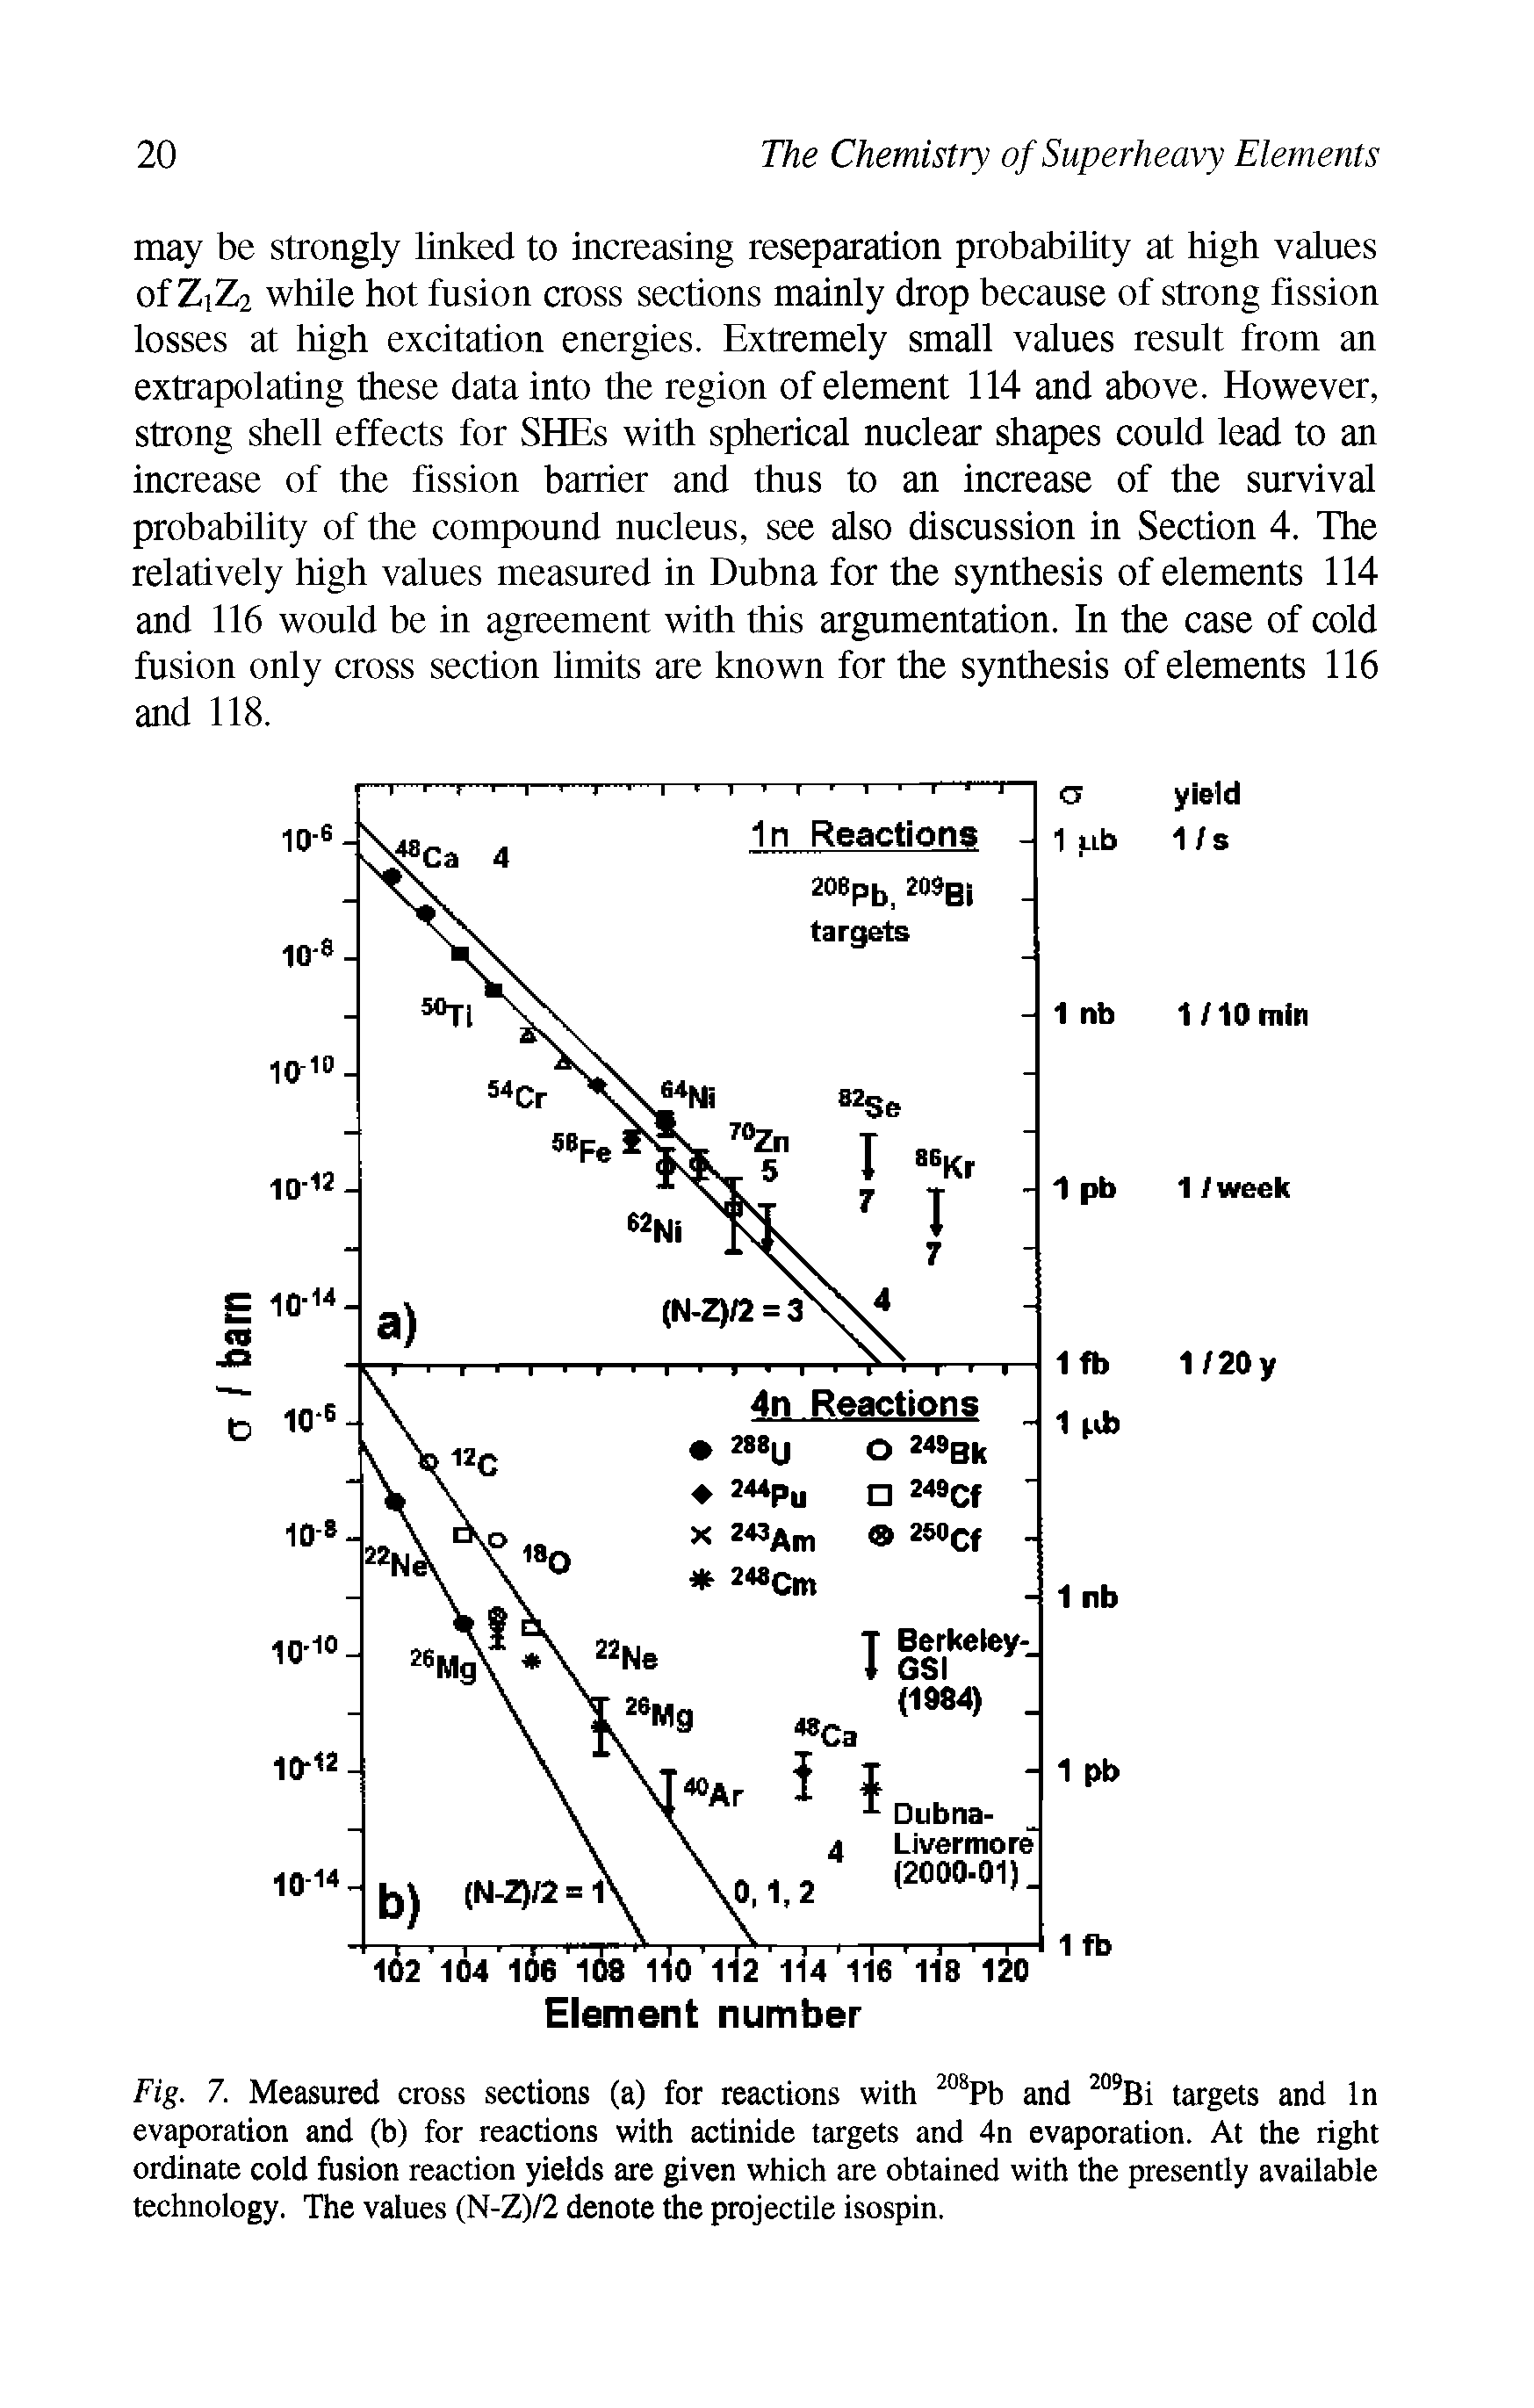 Fig. 7. Measured cross sections (a) for reactions with 208Pb and 209Bi targets and In evaporation and (b) for reactions with actinide targets and 4n evaporation. At the right ordinate cold fusion reaction yields are given which are obtained with the presently available technology. The values (N-Z)/2 denote the projectile isospin.